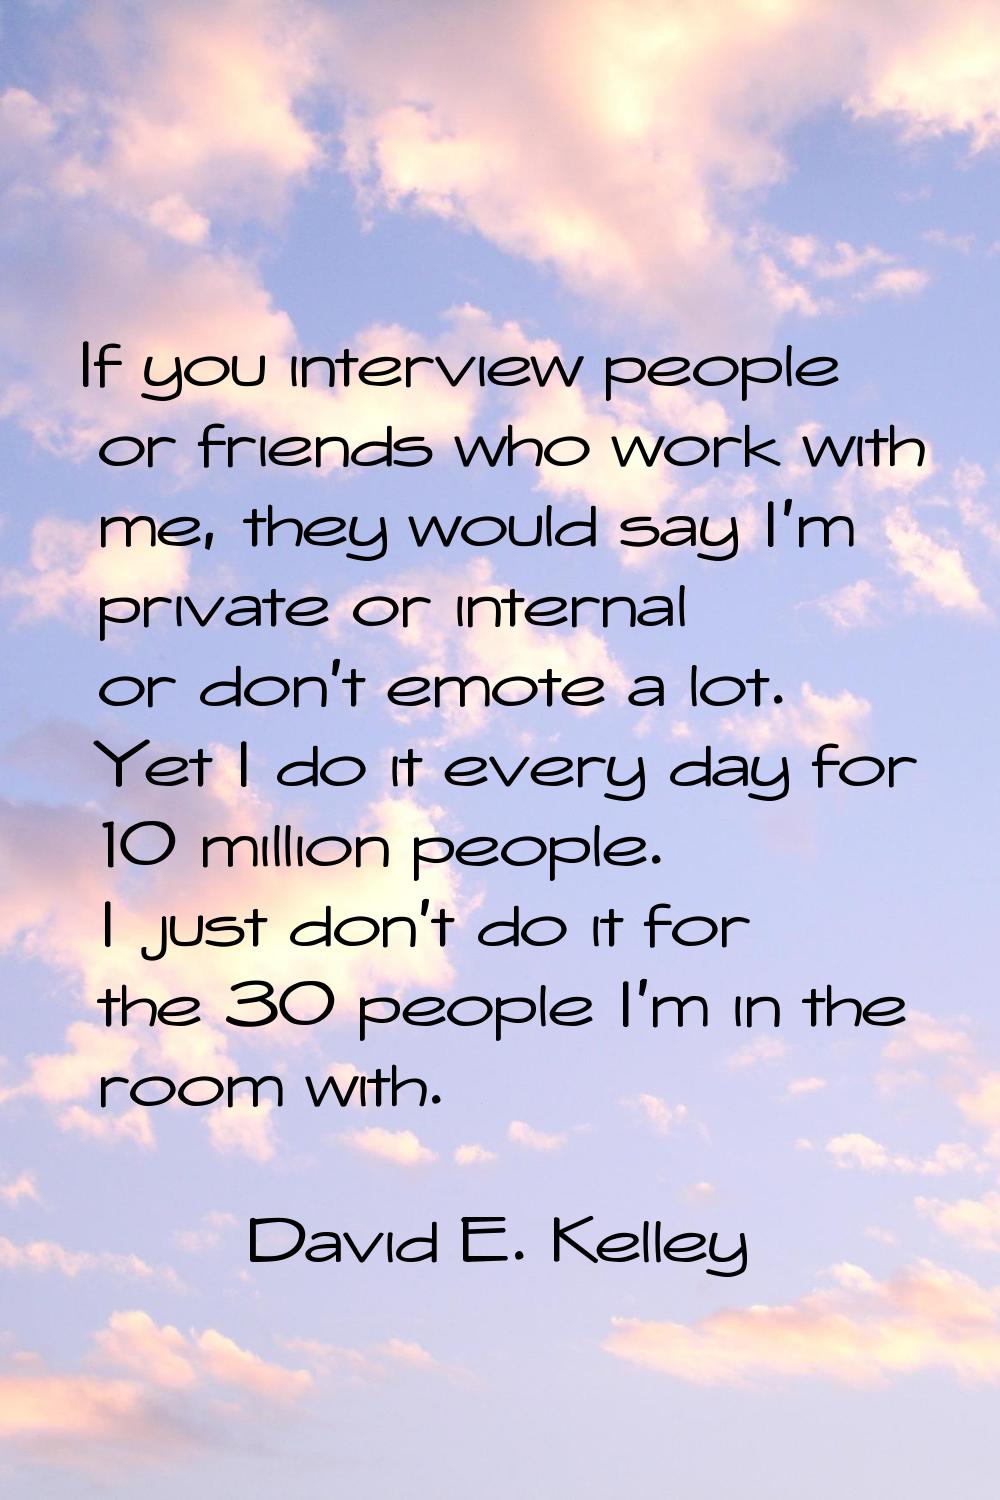 If you interview people or friends who work with me, they would say I'm private or internal or don'